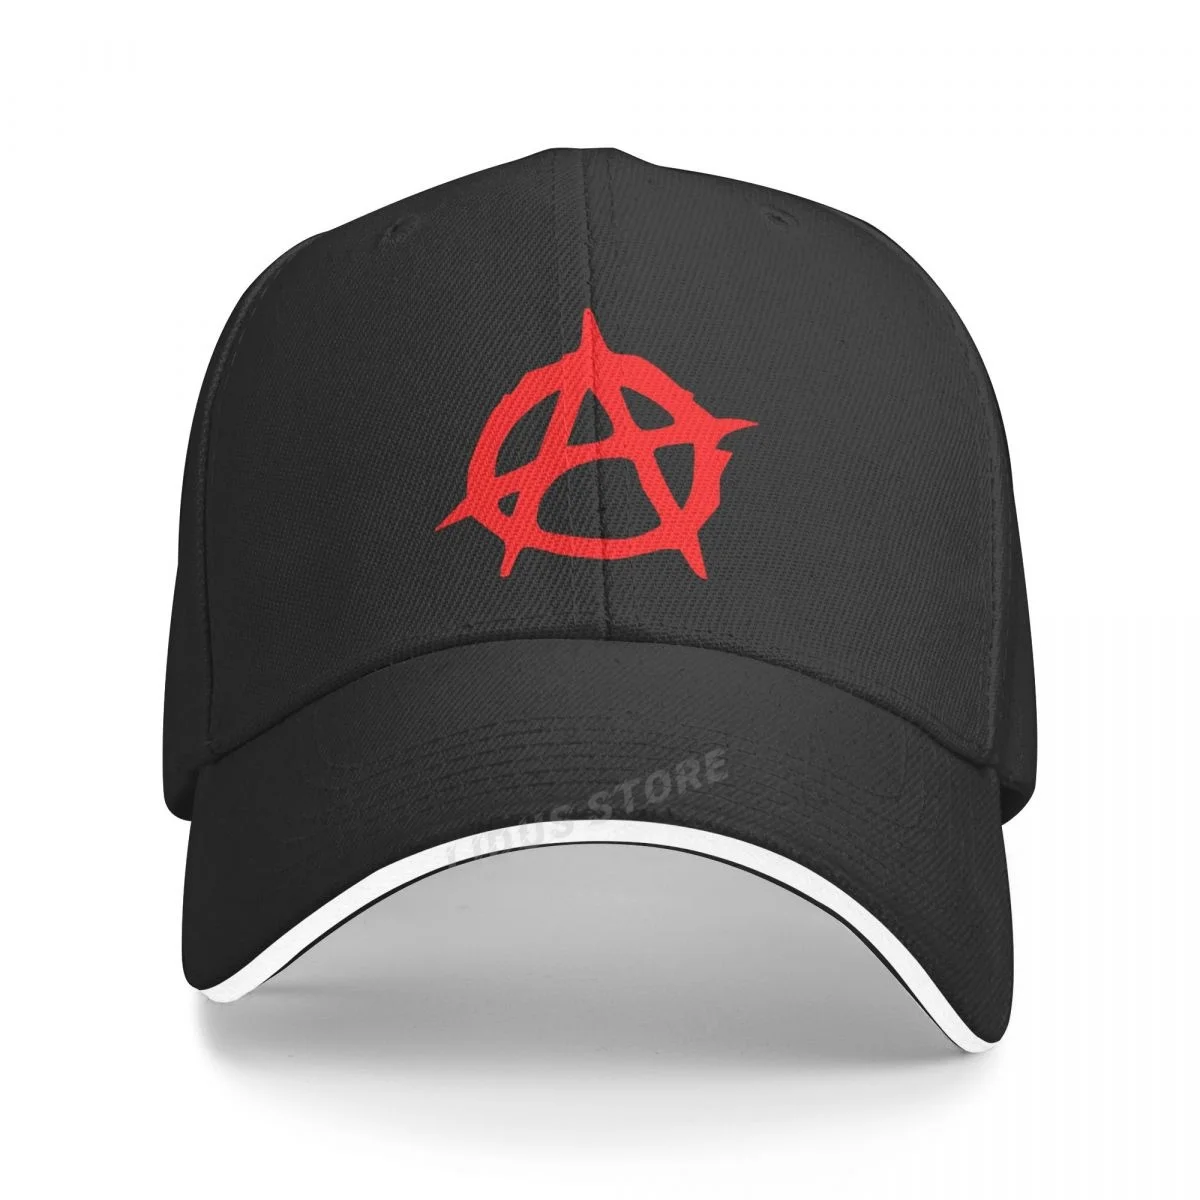 Brand Hats Sons Of Anarchy For Reaper Crew Fitted Baseball Cap Women Men Letters Print Anarchy Hat Hip Hop Hat For Men